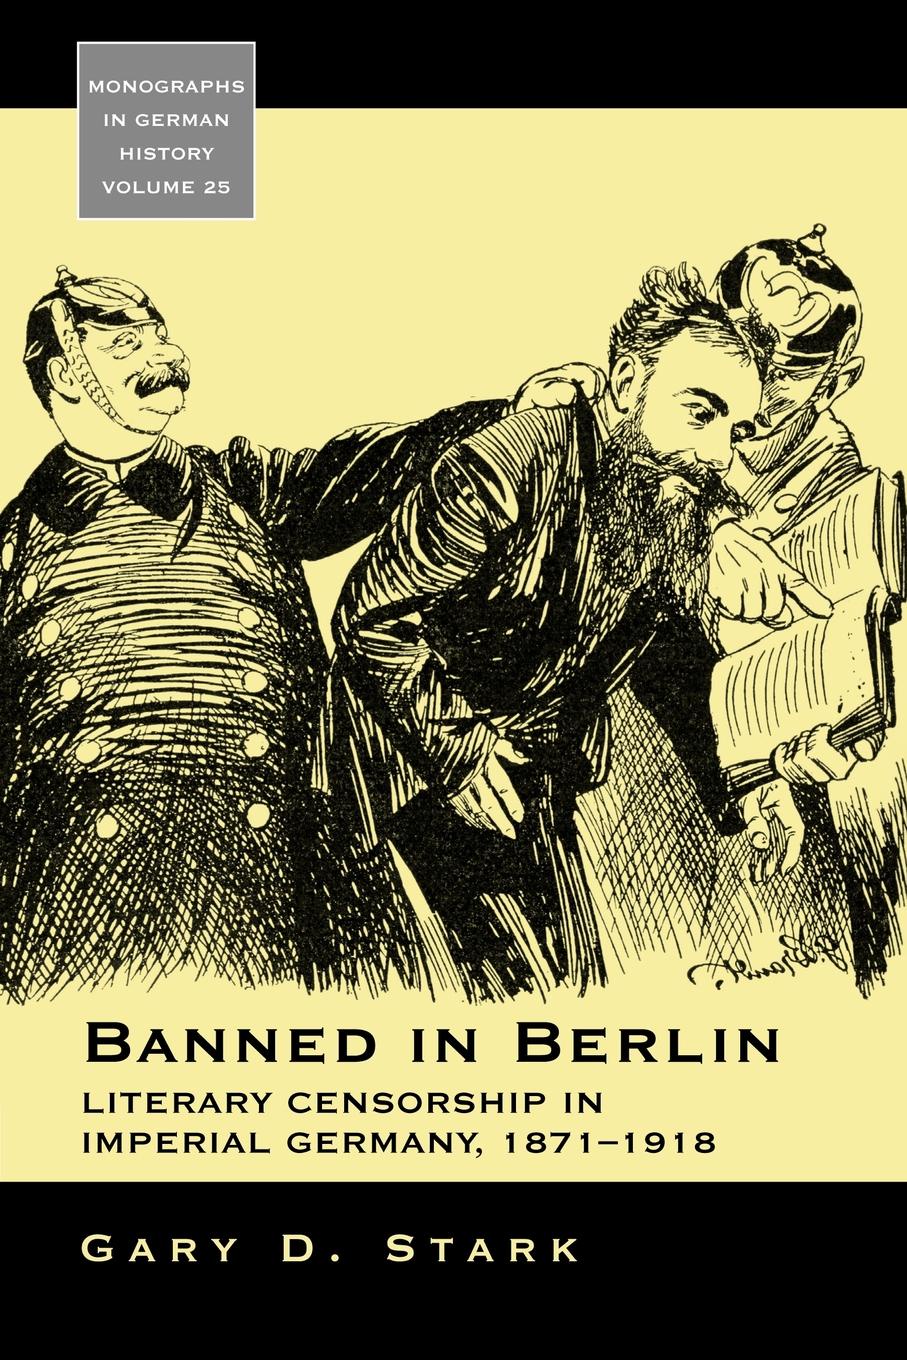 Banned in Berlin. Literary Censorship in Imperial Germany, 1871-1918